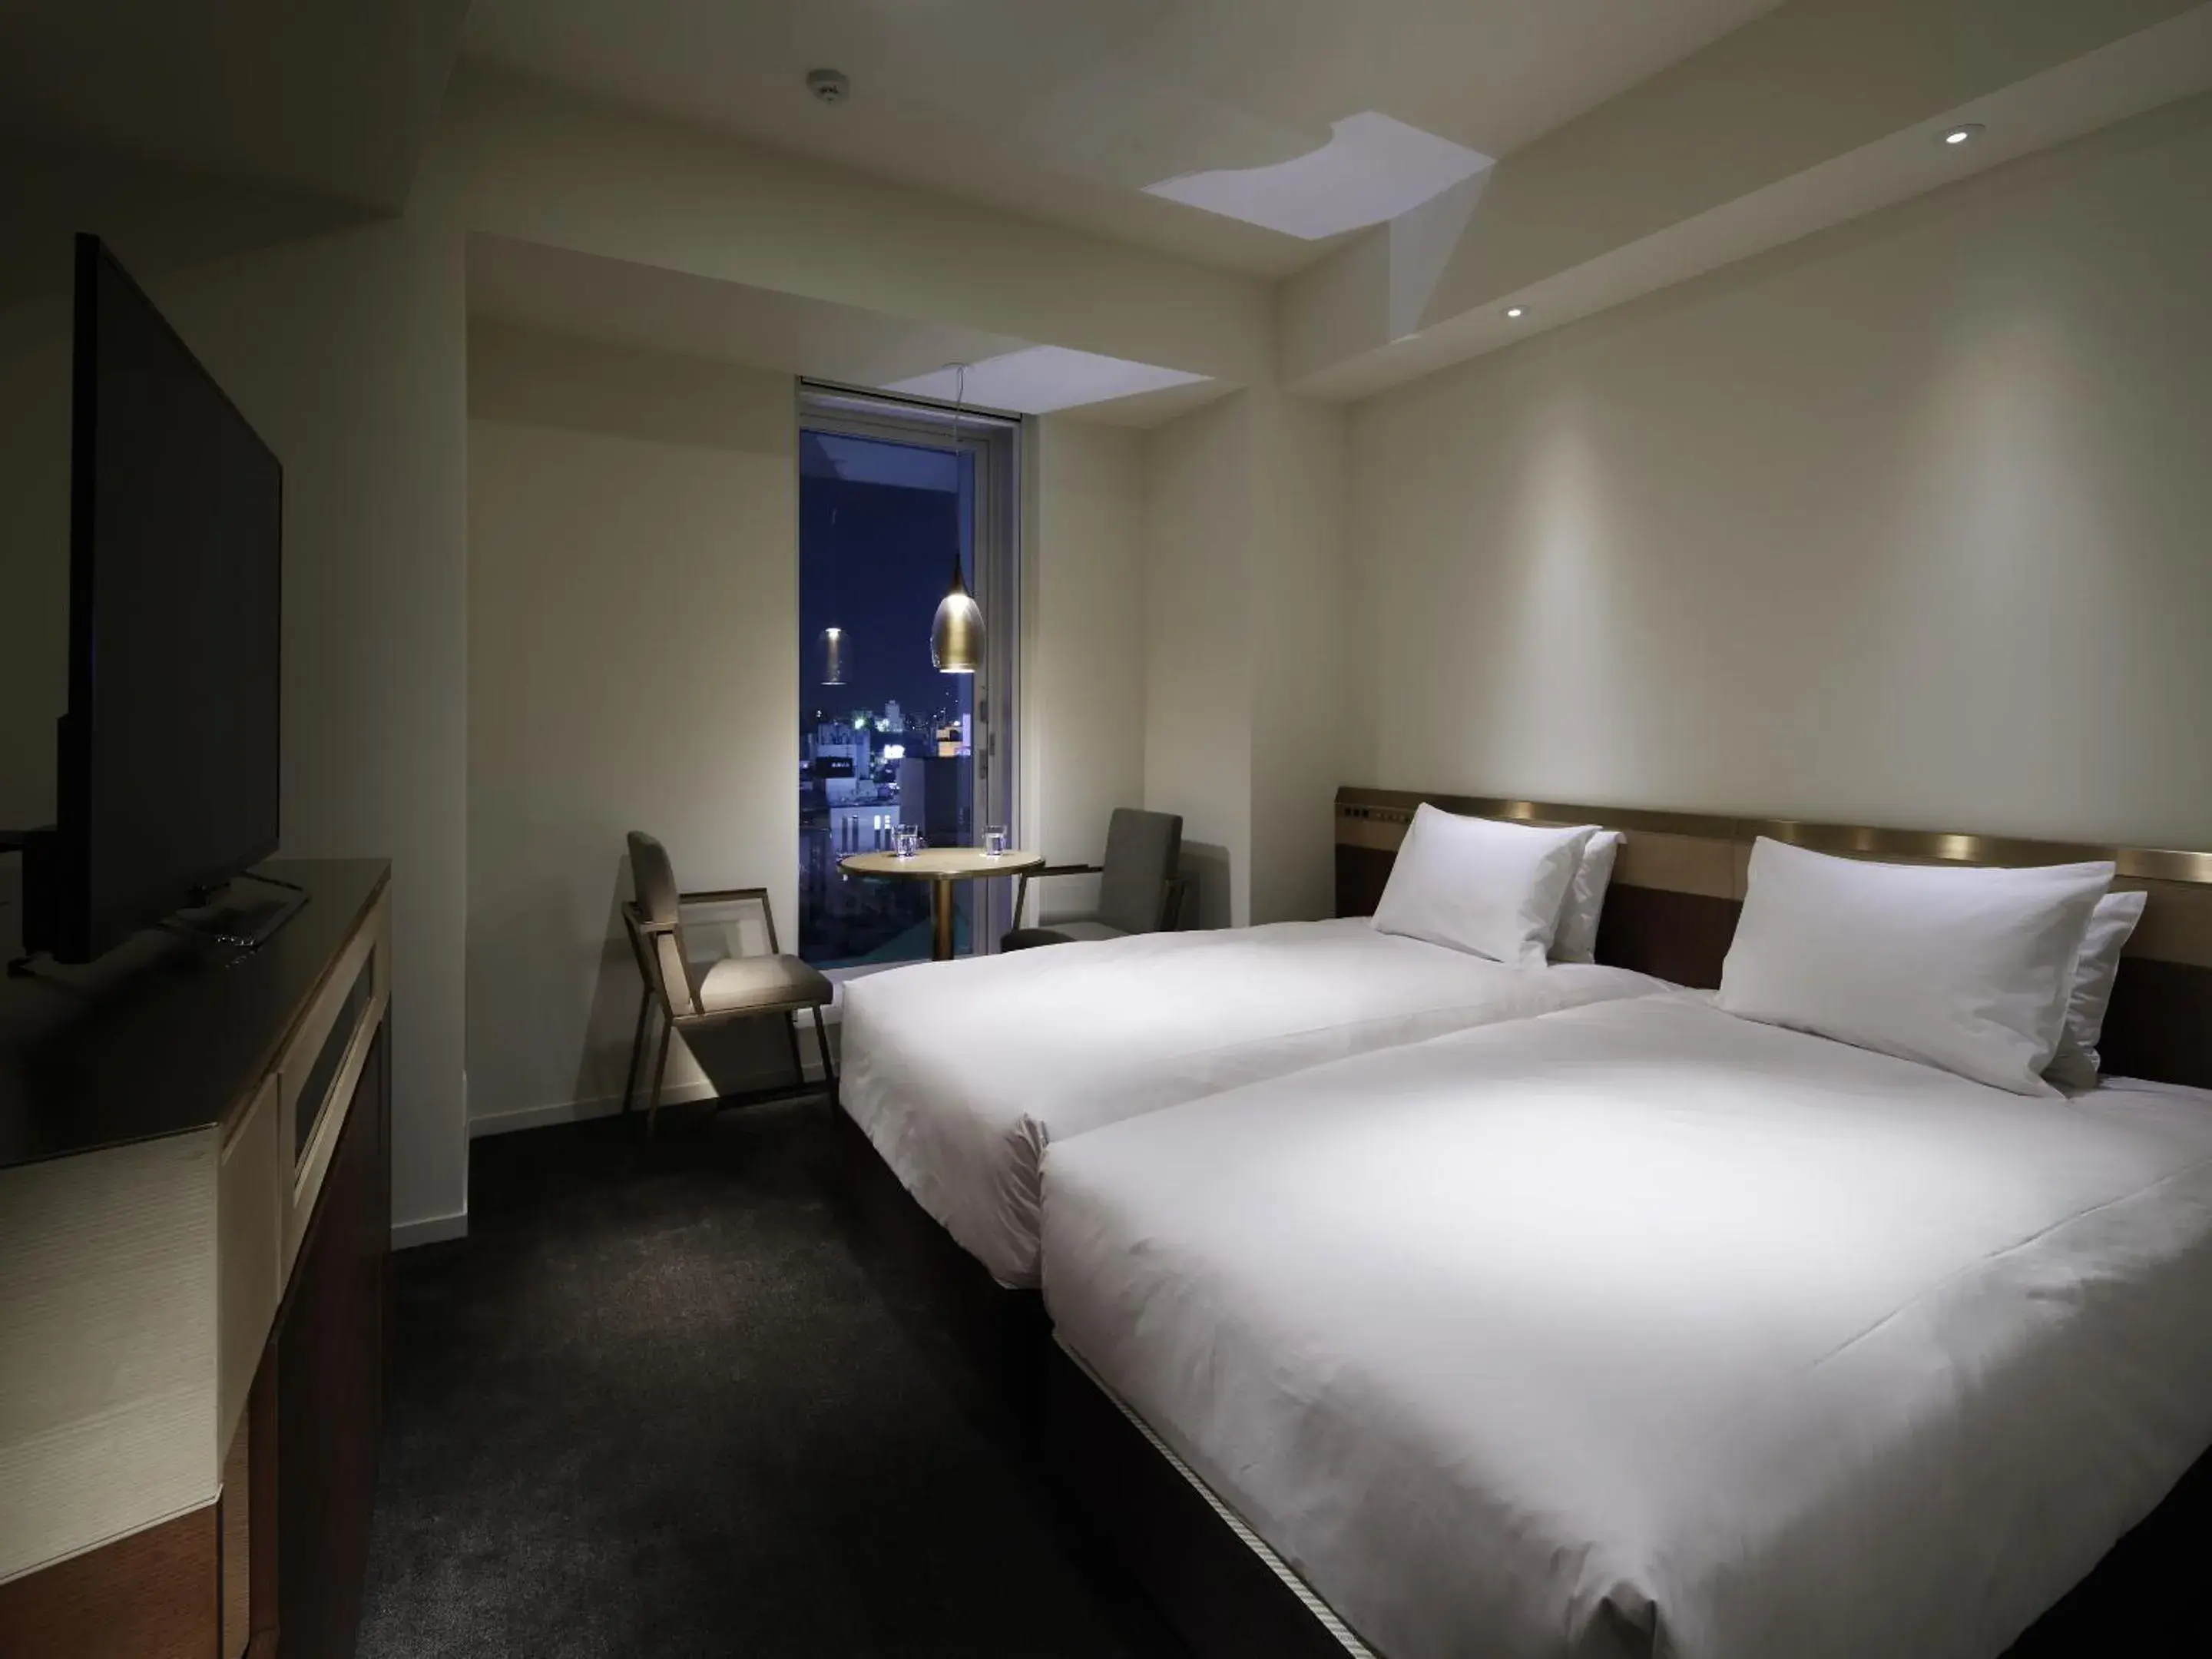 Deluxe Hollywood Twin Room - Non-Smoking in Shinjuku Granbell Hotel